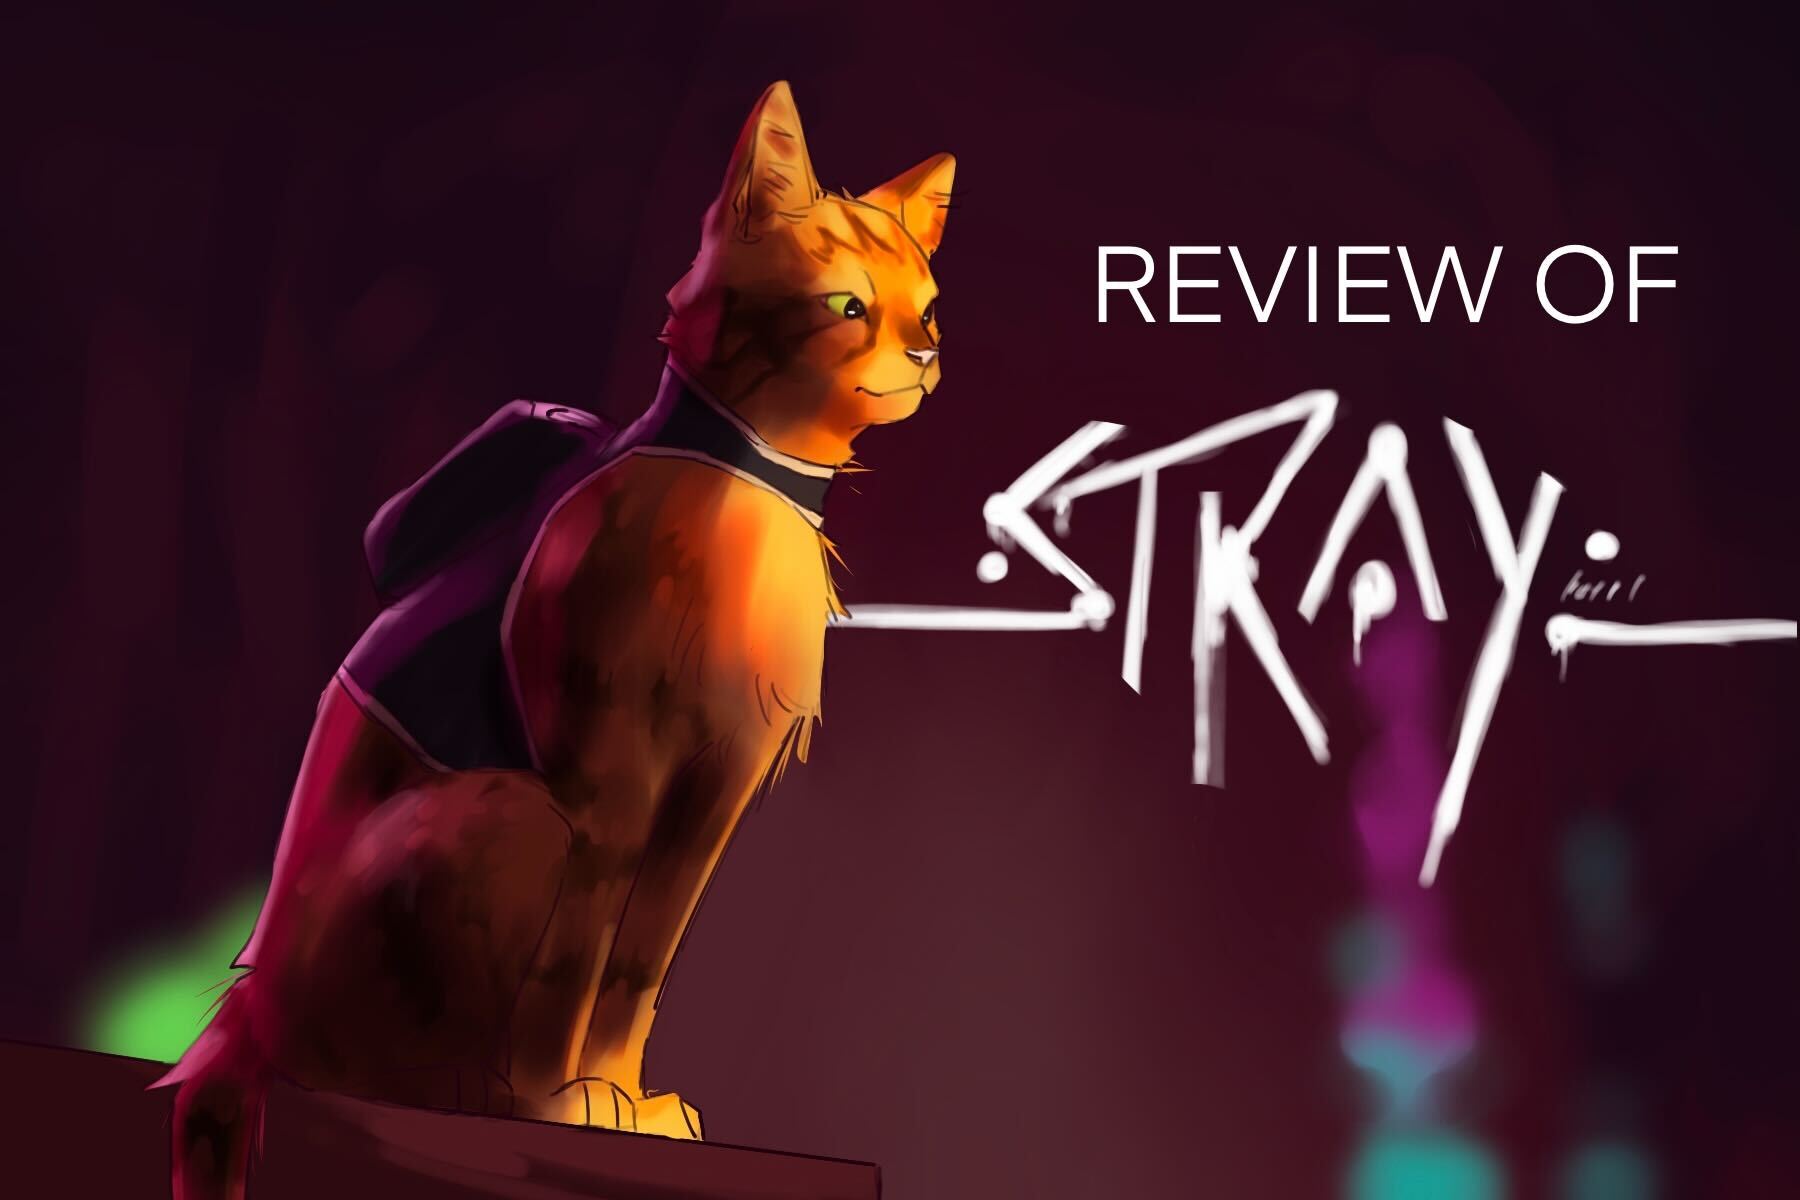 The main character of "Stray"